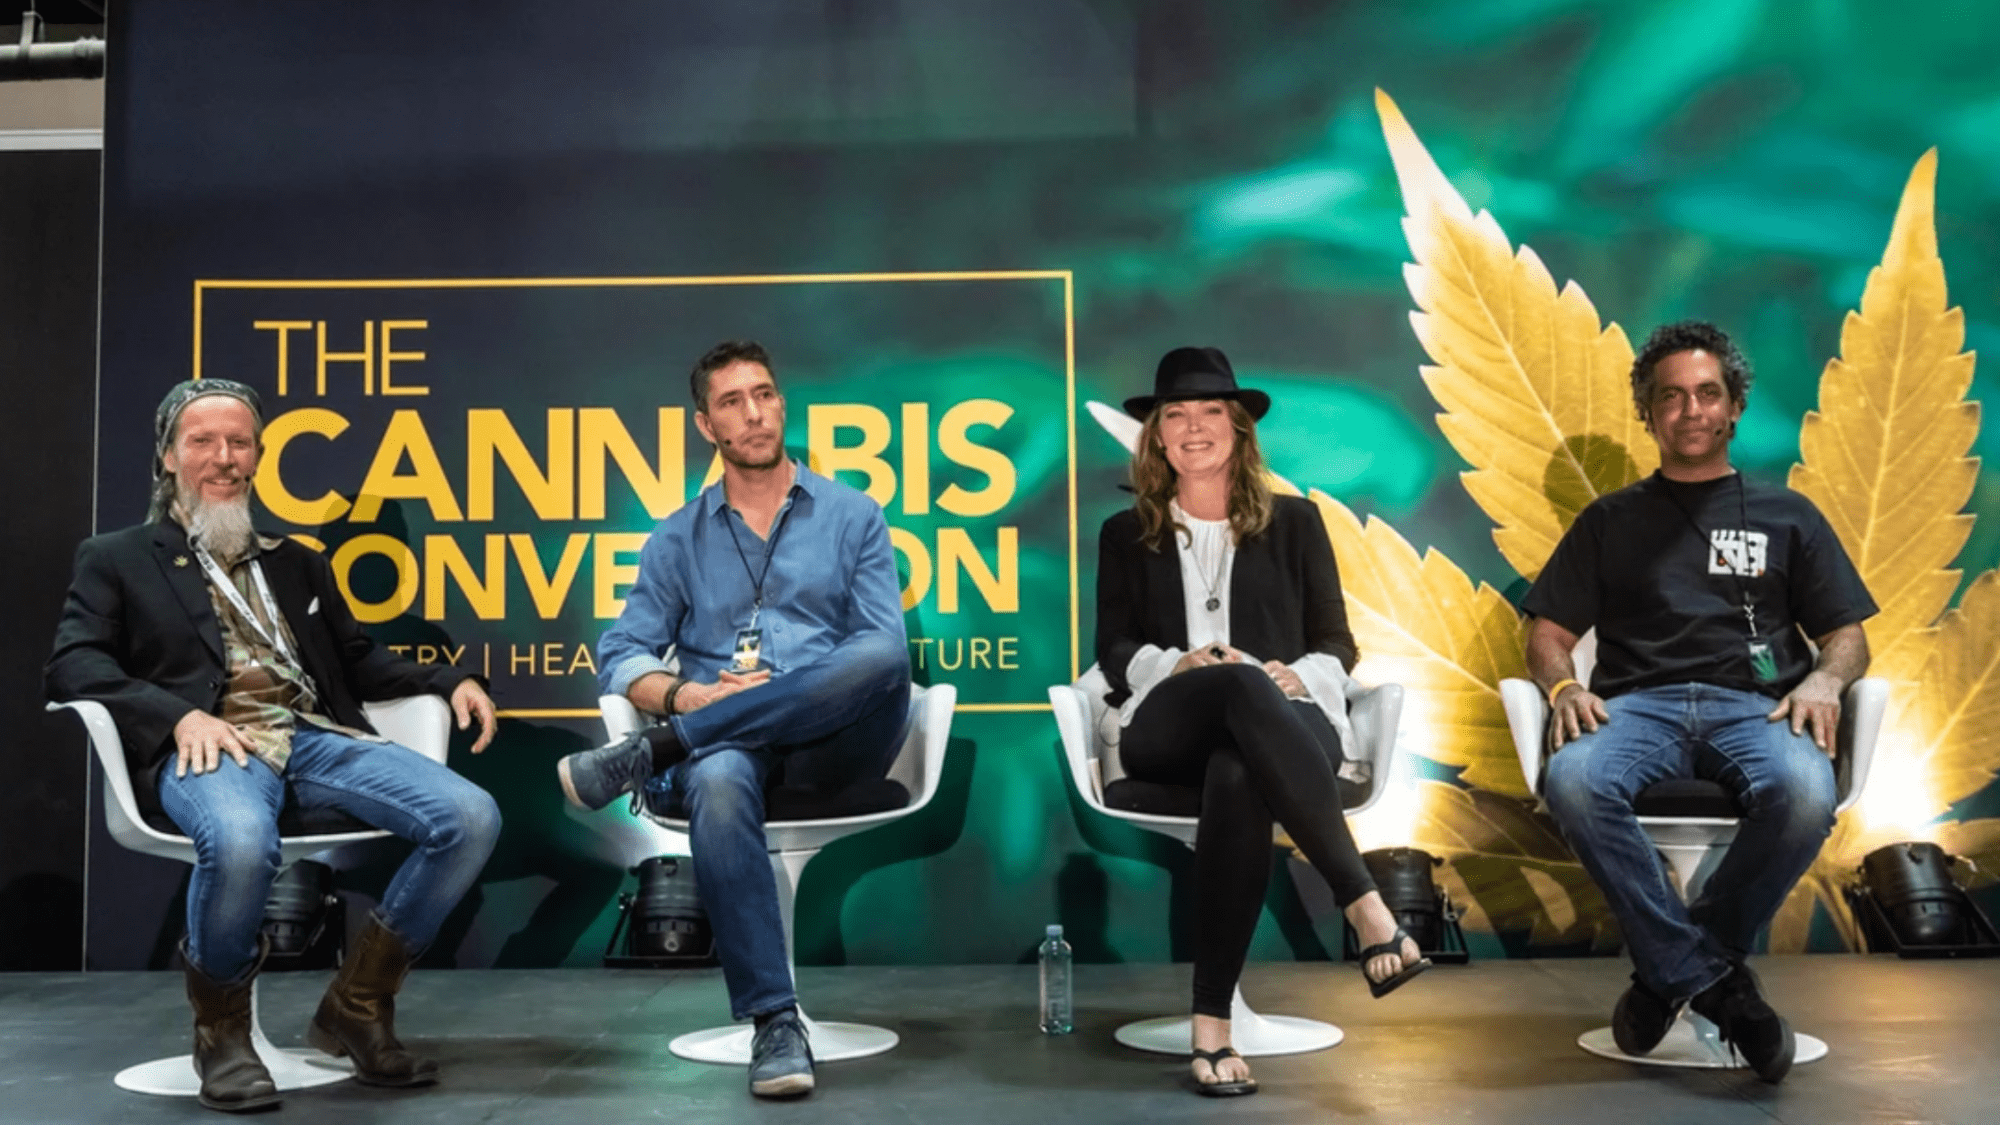 The Cannabis Expo runs from 10:00 to 21:00 on Friday 18 November and Saturday 19 November, and then from 10:00 to 16:00 on Sunday 20 November. Be sure to look out for GrowerIQ's stand, as well as our speaking slot. We'll be chatting about all things seed-to-sale and the industry.